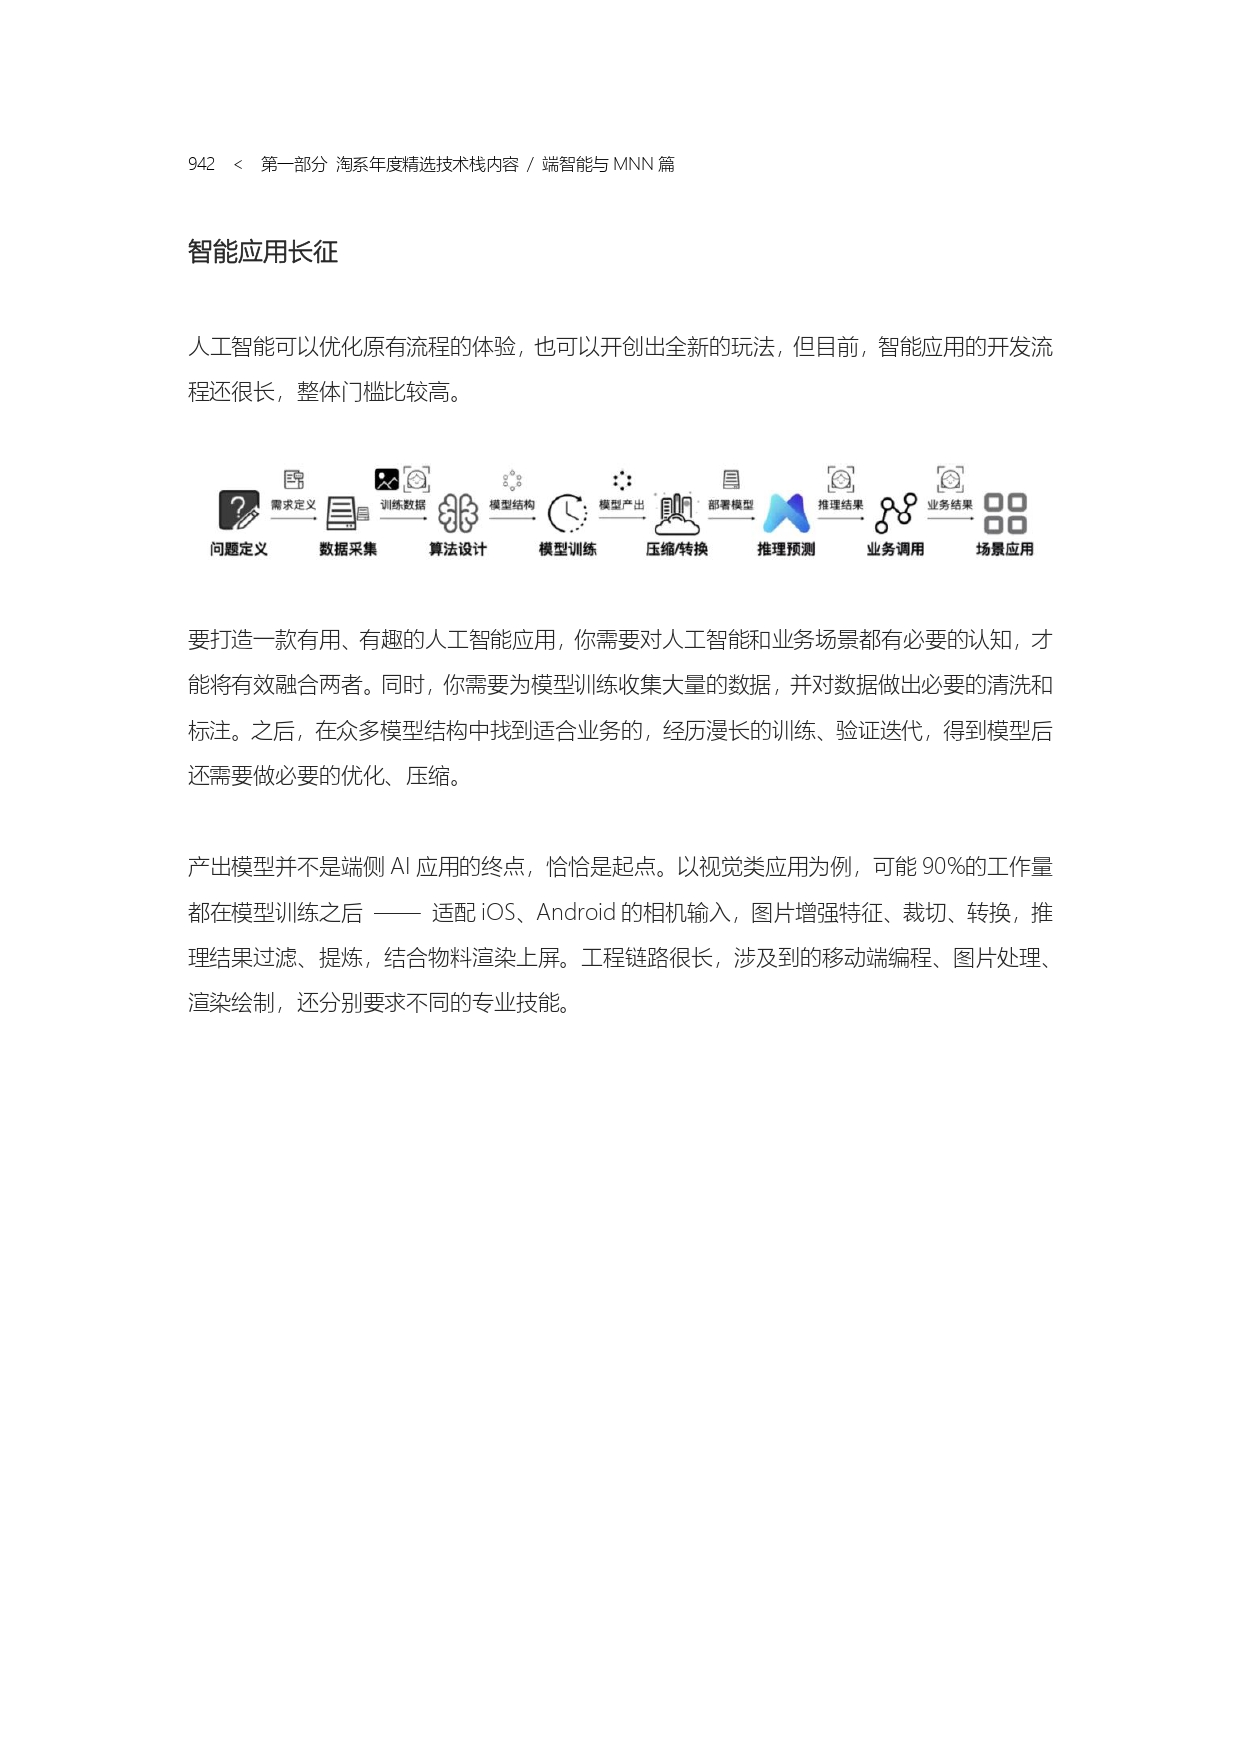 The Complete Works of Tao Technology 2020-571-1189-301-619_page-0072.jpg